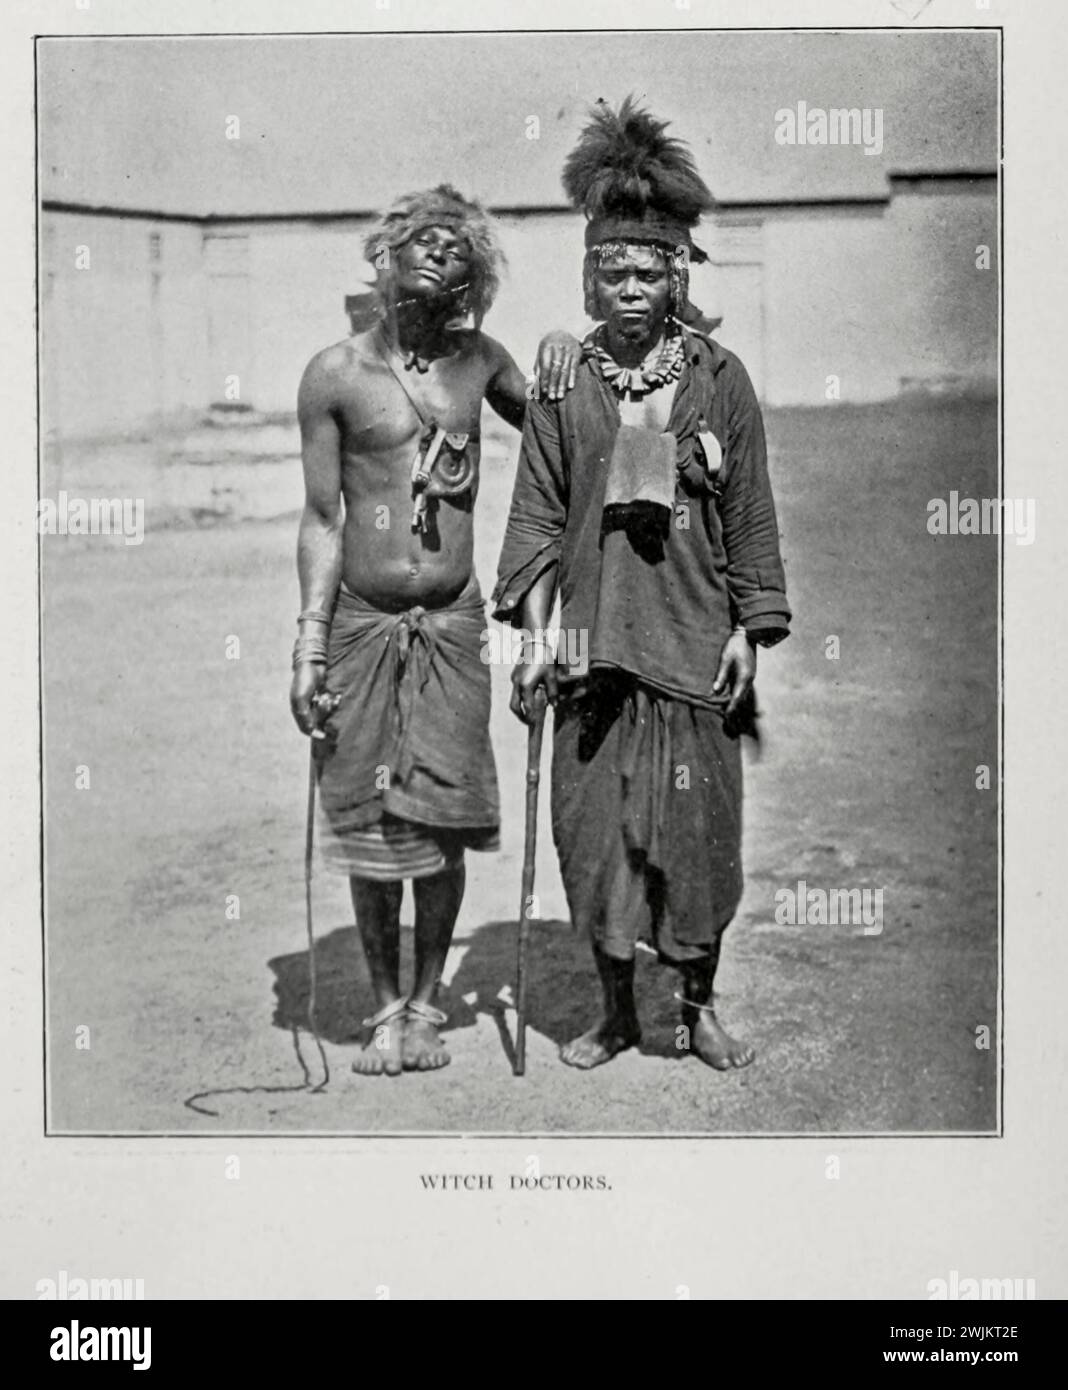 Witch Doctors from the Article THE GOLD MINES OF THE WITWATERSRAND, SOUTH AFRICA. By John Hays Hammond. Part 1: THEIR RAPID DEVELOPMENT, AND THE GEOLOGY OF THE REGION. from The Engineering Magazine Devoted to Industrial Progress Volume XIV October 1897 - March 1898 The Engineering Magazine Co Stock Photo